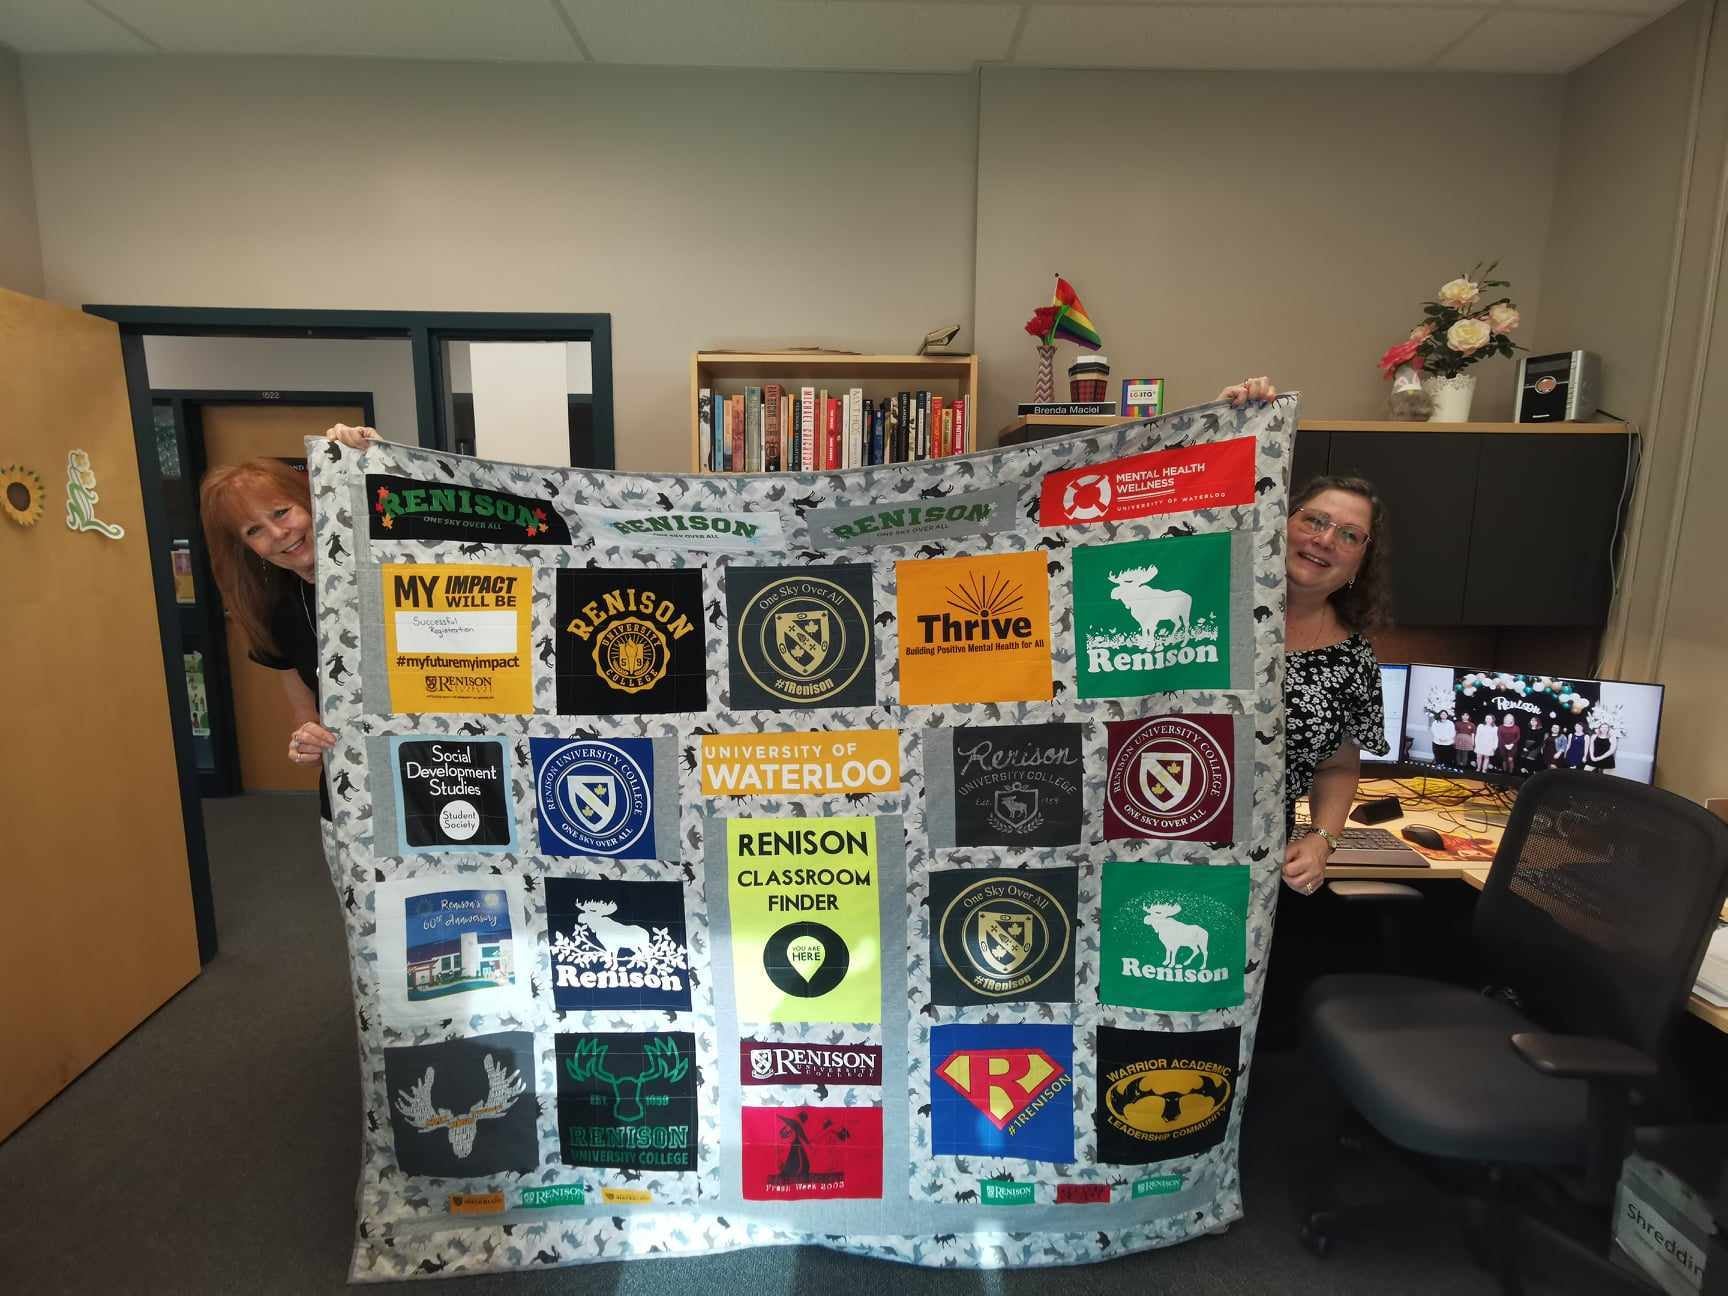 Brenda's most recent quilt, which has been created with the fronts of t-shirts from Renison through the years. The quilt is being held up by Brenda and a colleague. 